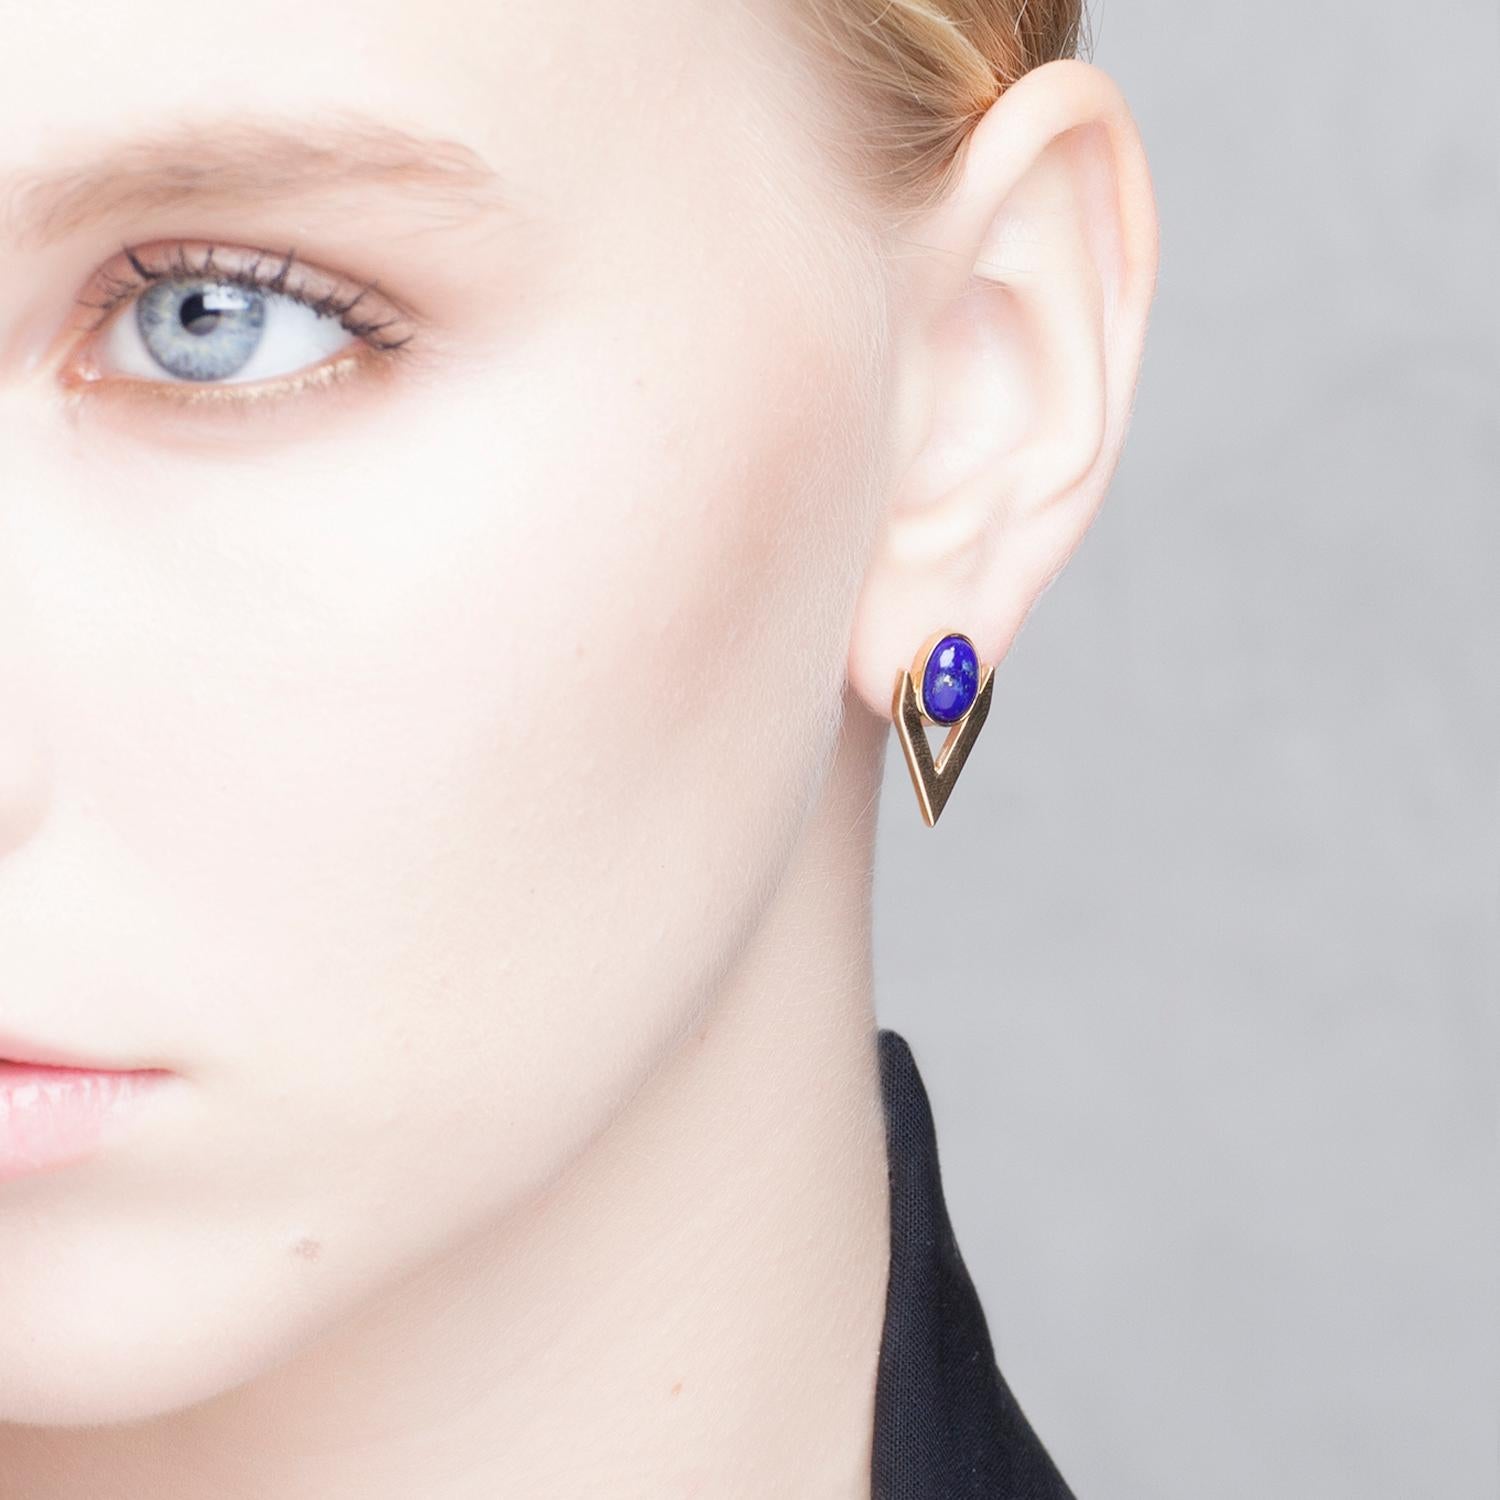 Contemporary Lapis Lazuli Cabochon Earring Pair in 9 Carat Gold from Iosselliani For Sale